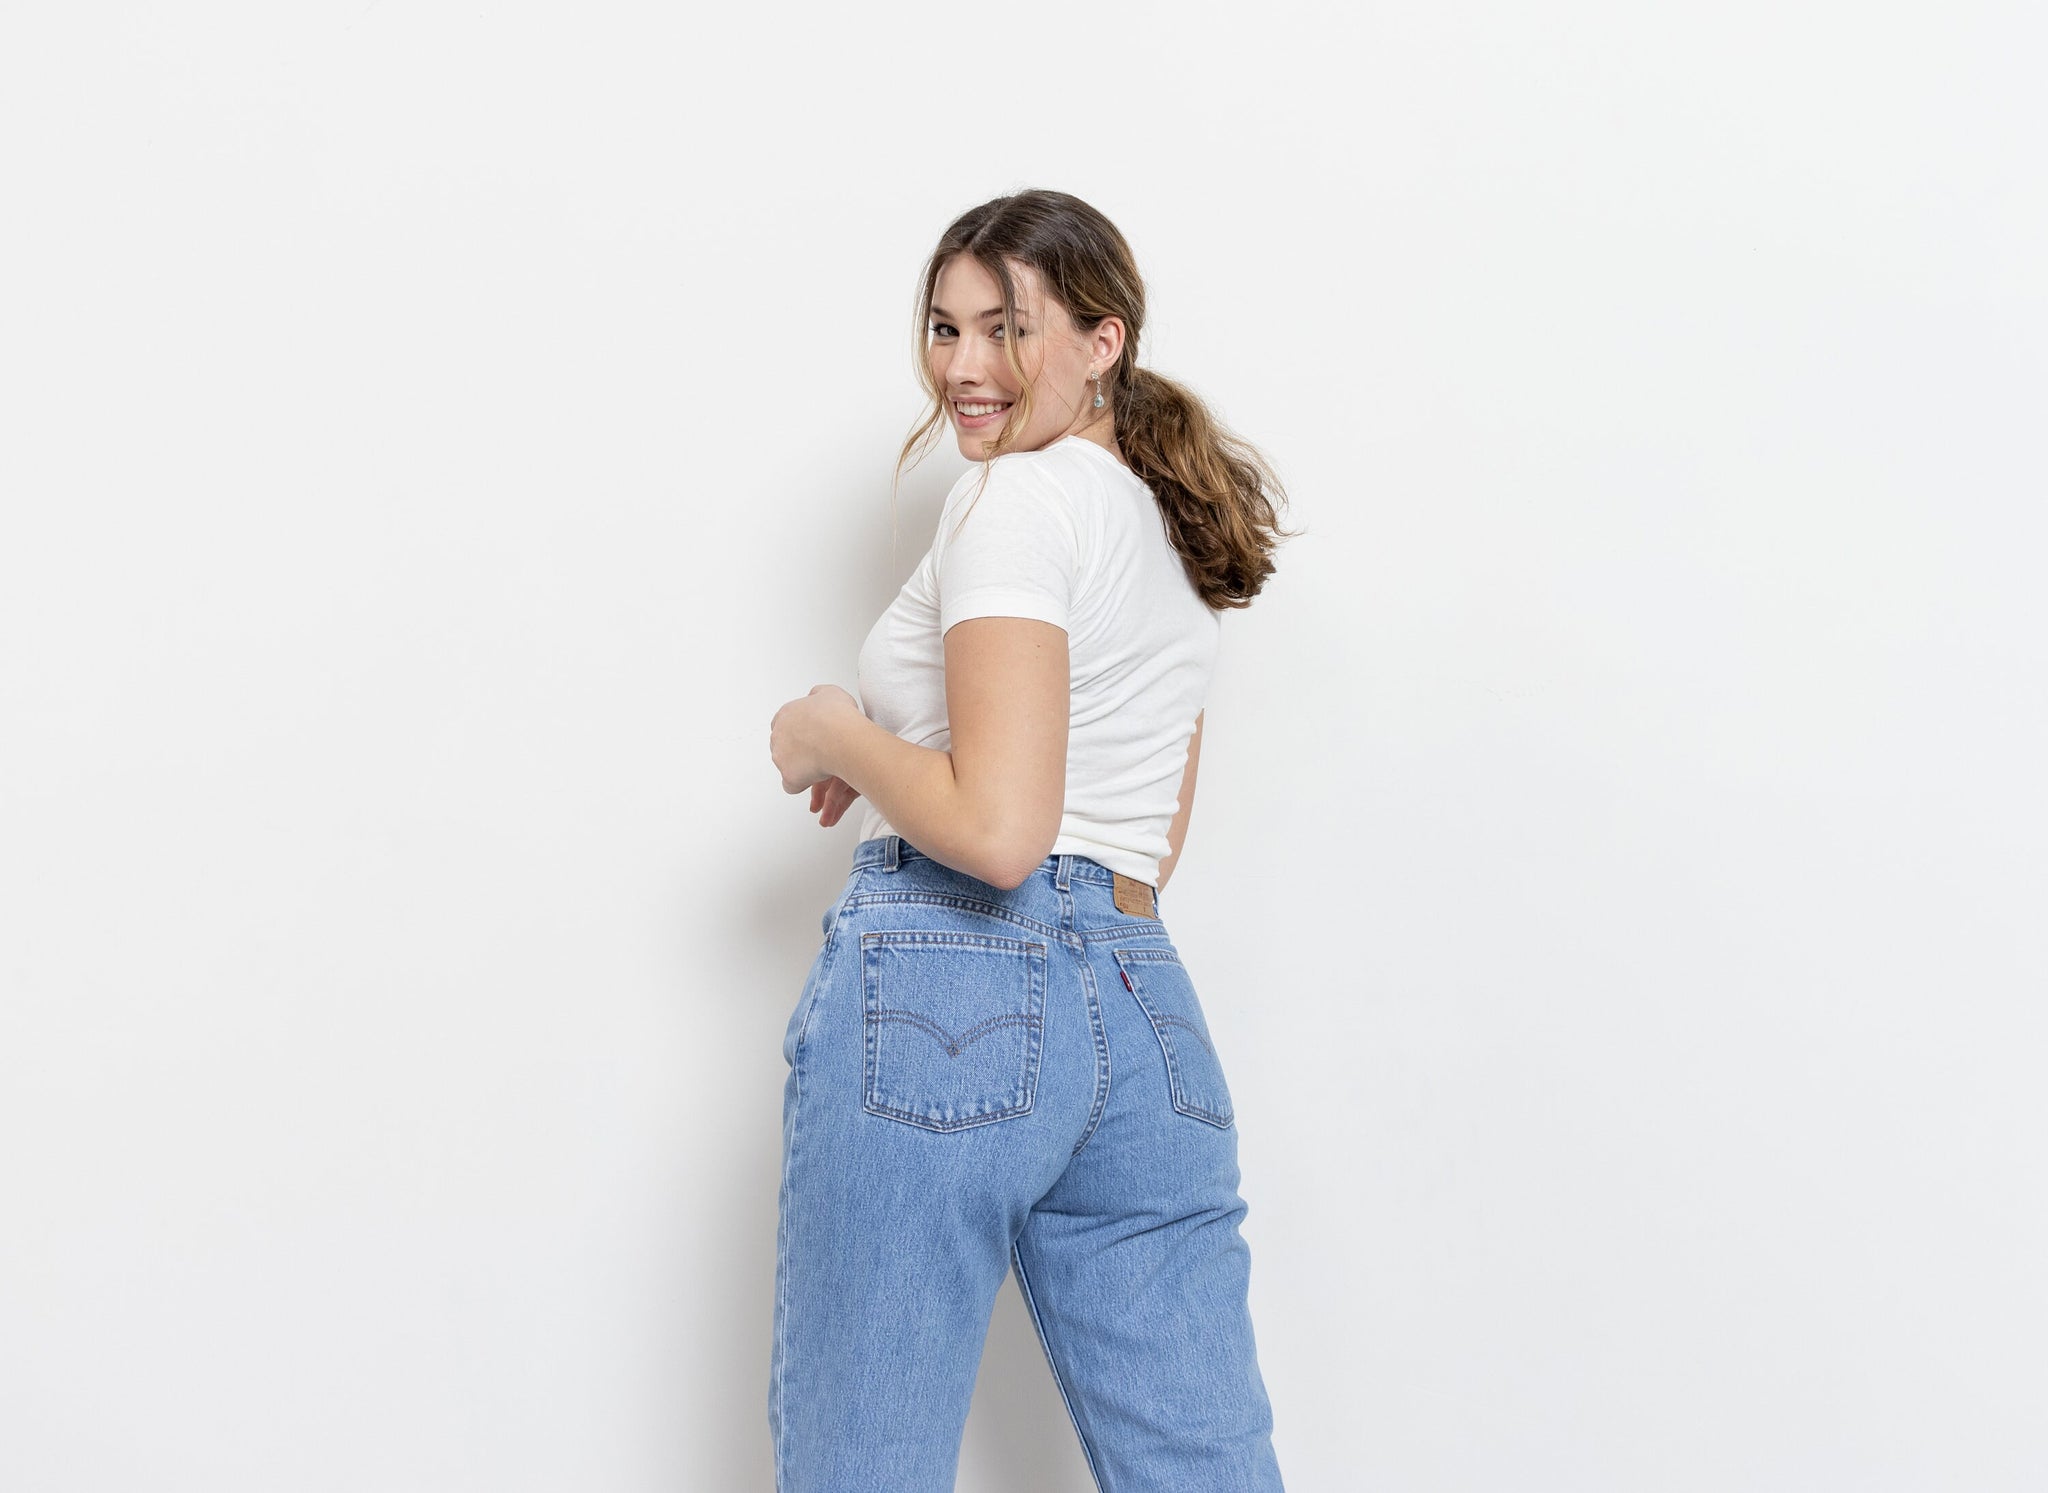 Vintage Levi's 550 Jeans For Women – Better Stay Together